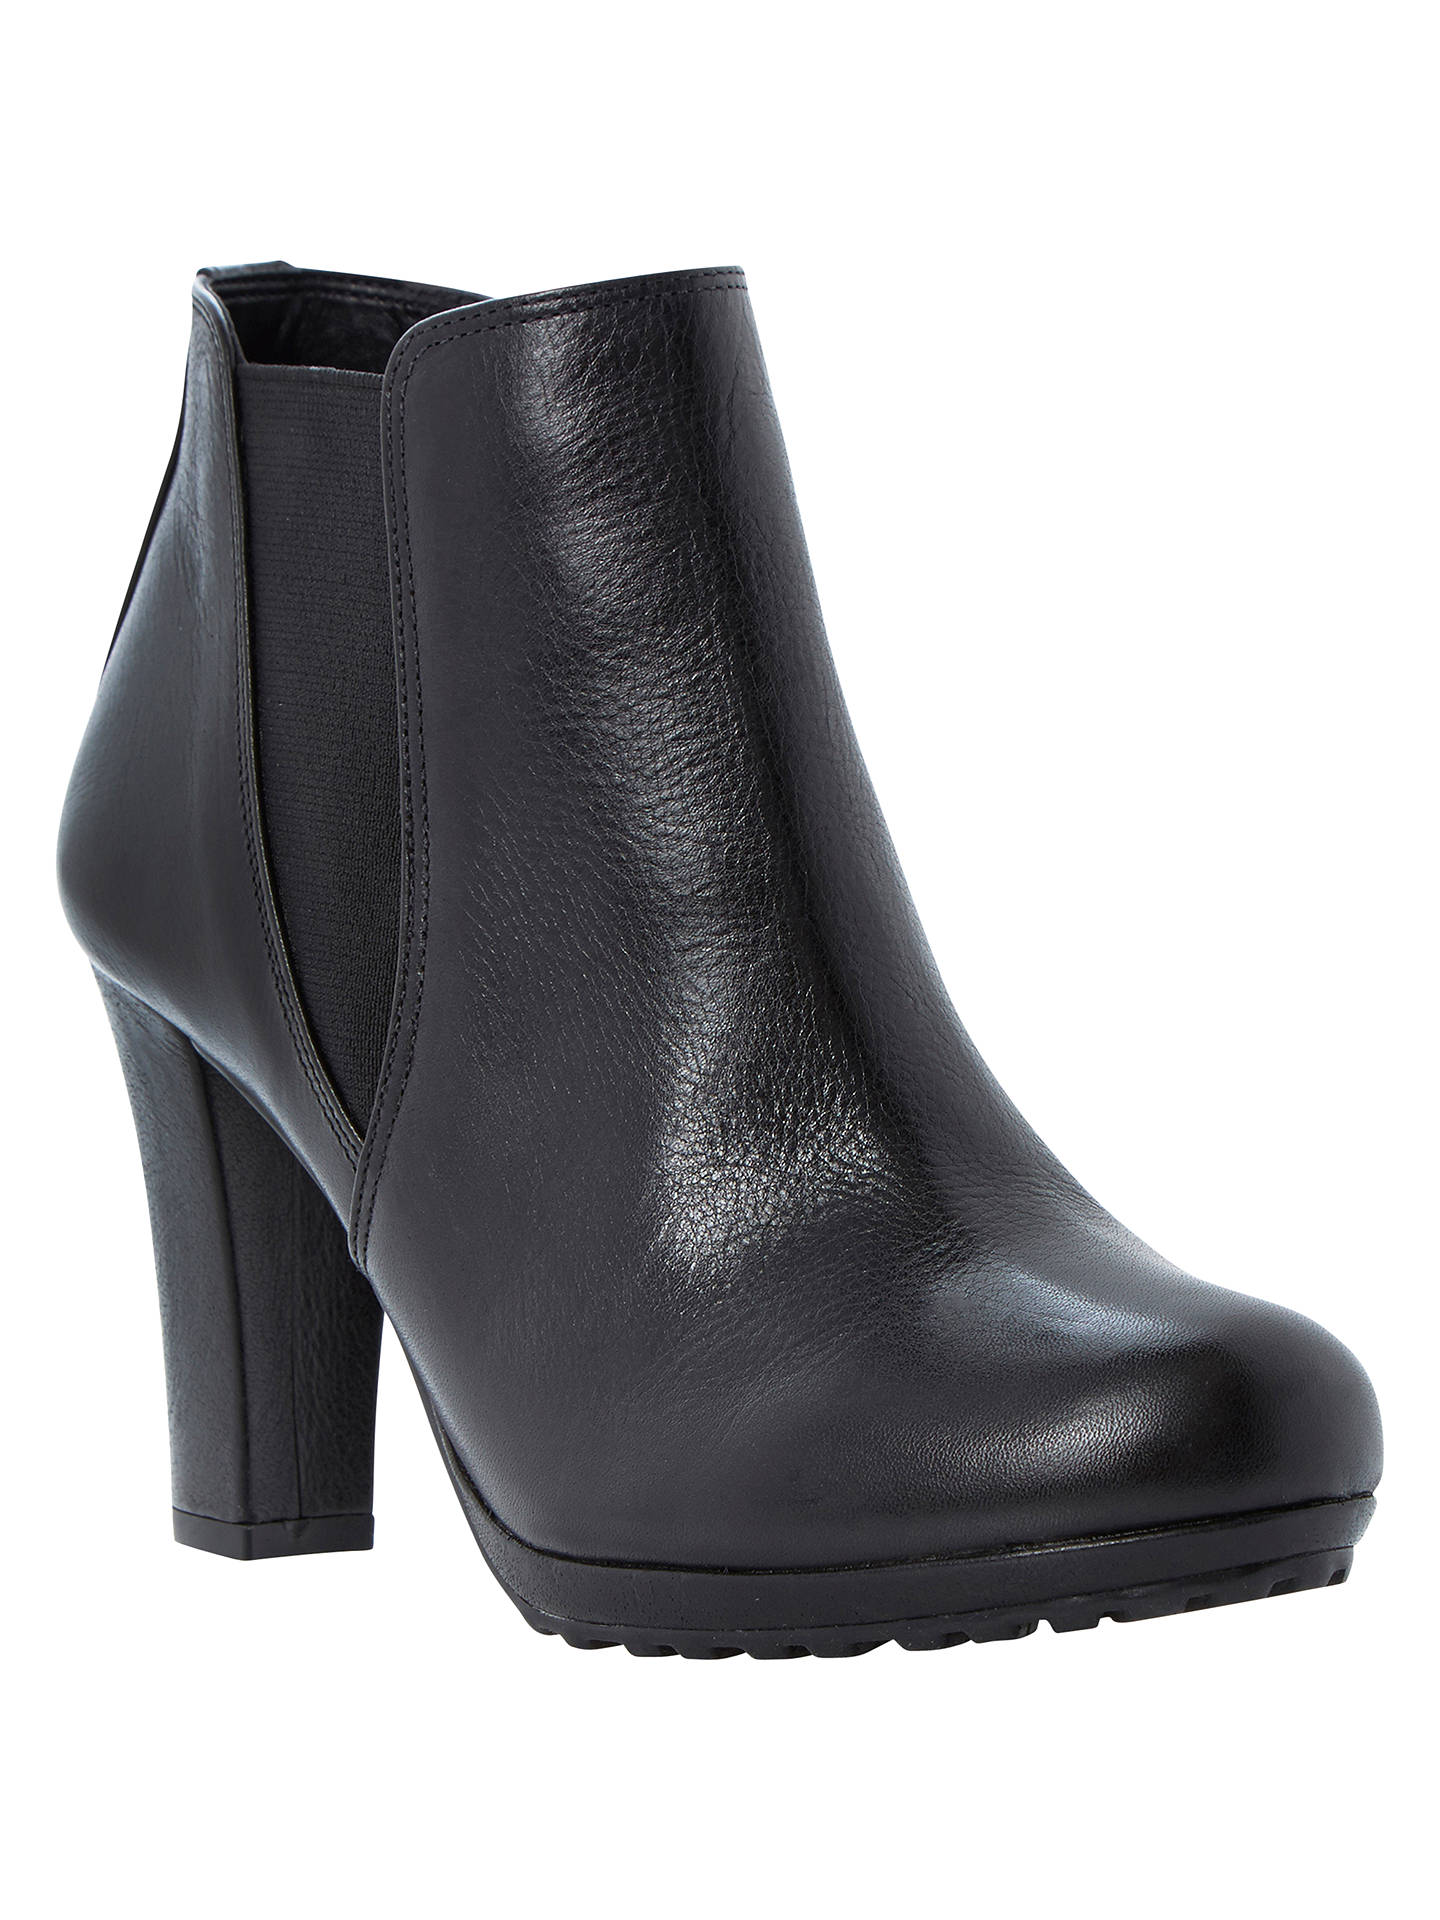 Dune Pug Leather Ankle Boots, Black at John Lewis & Partners